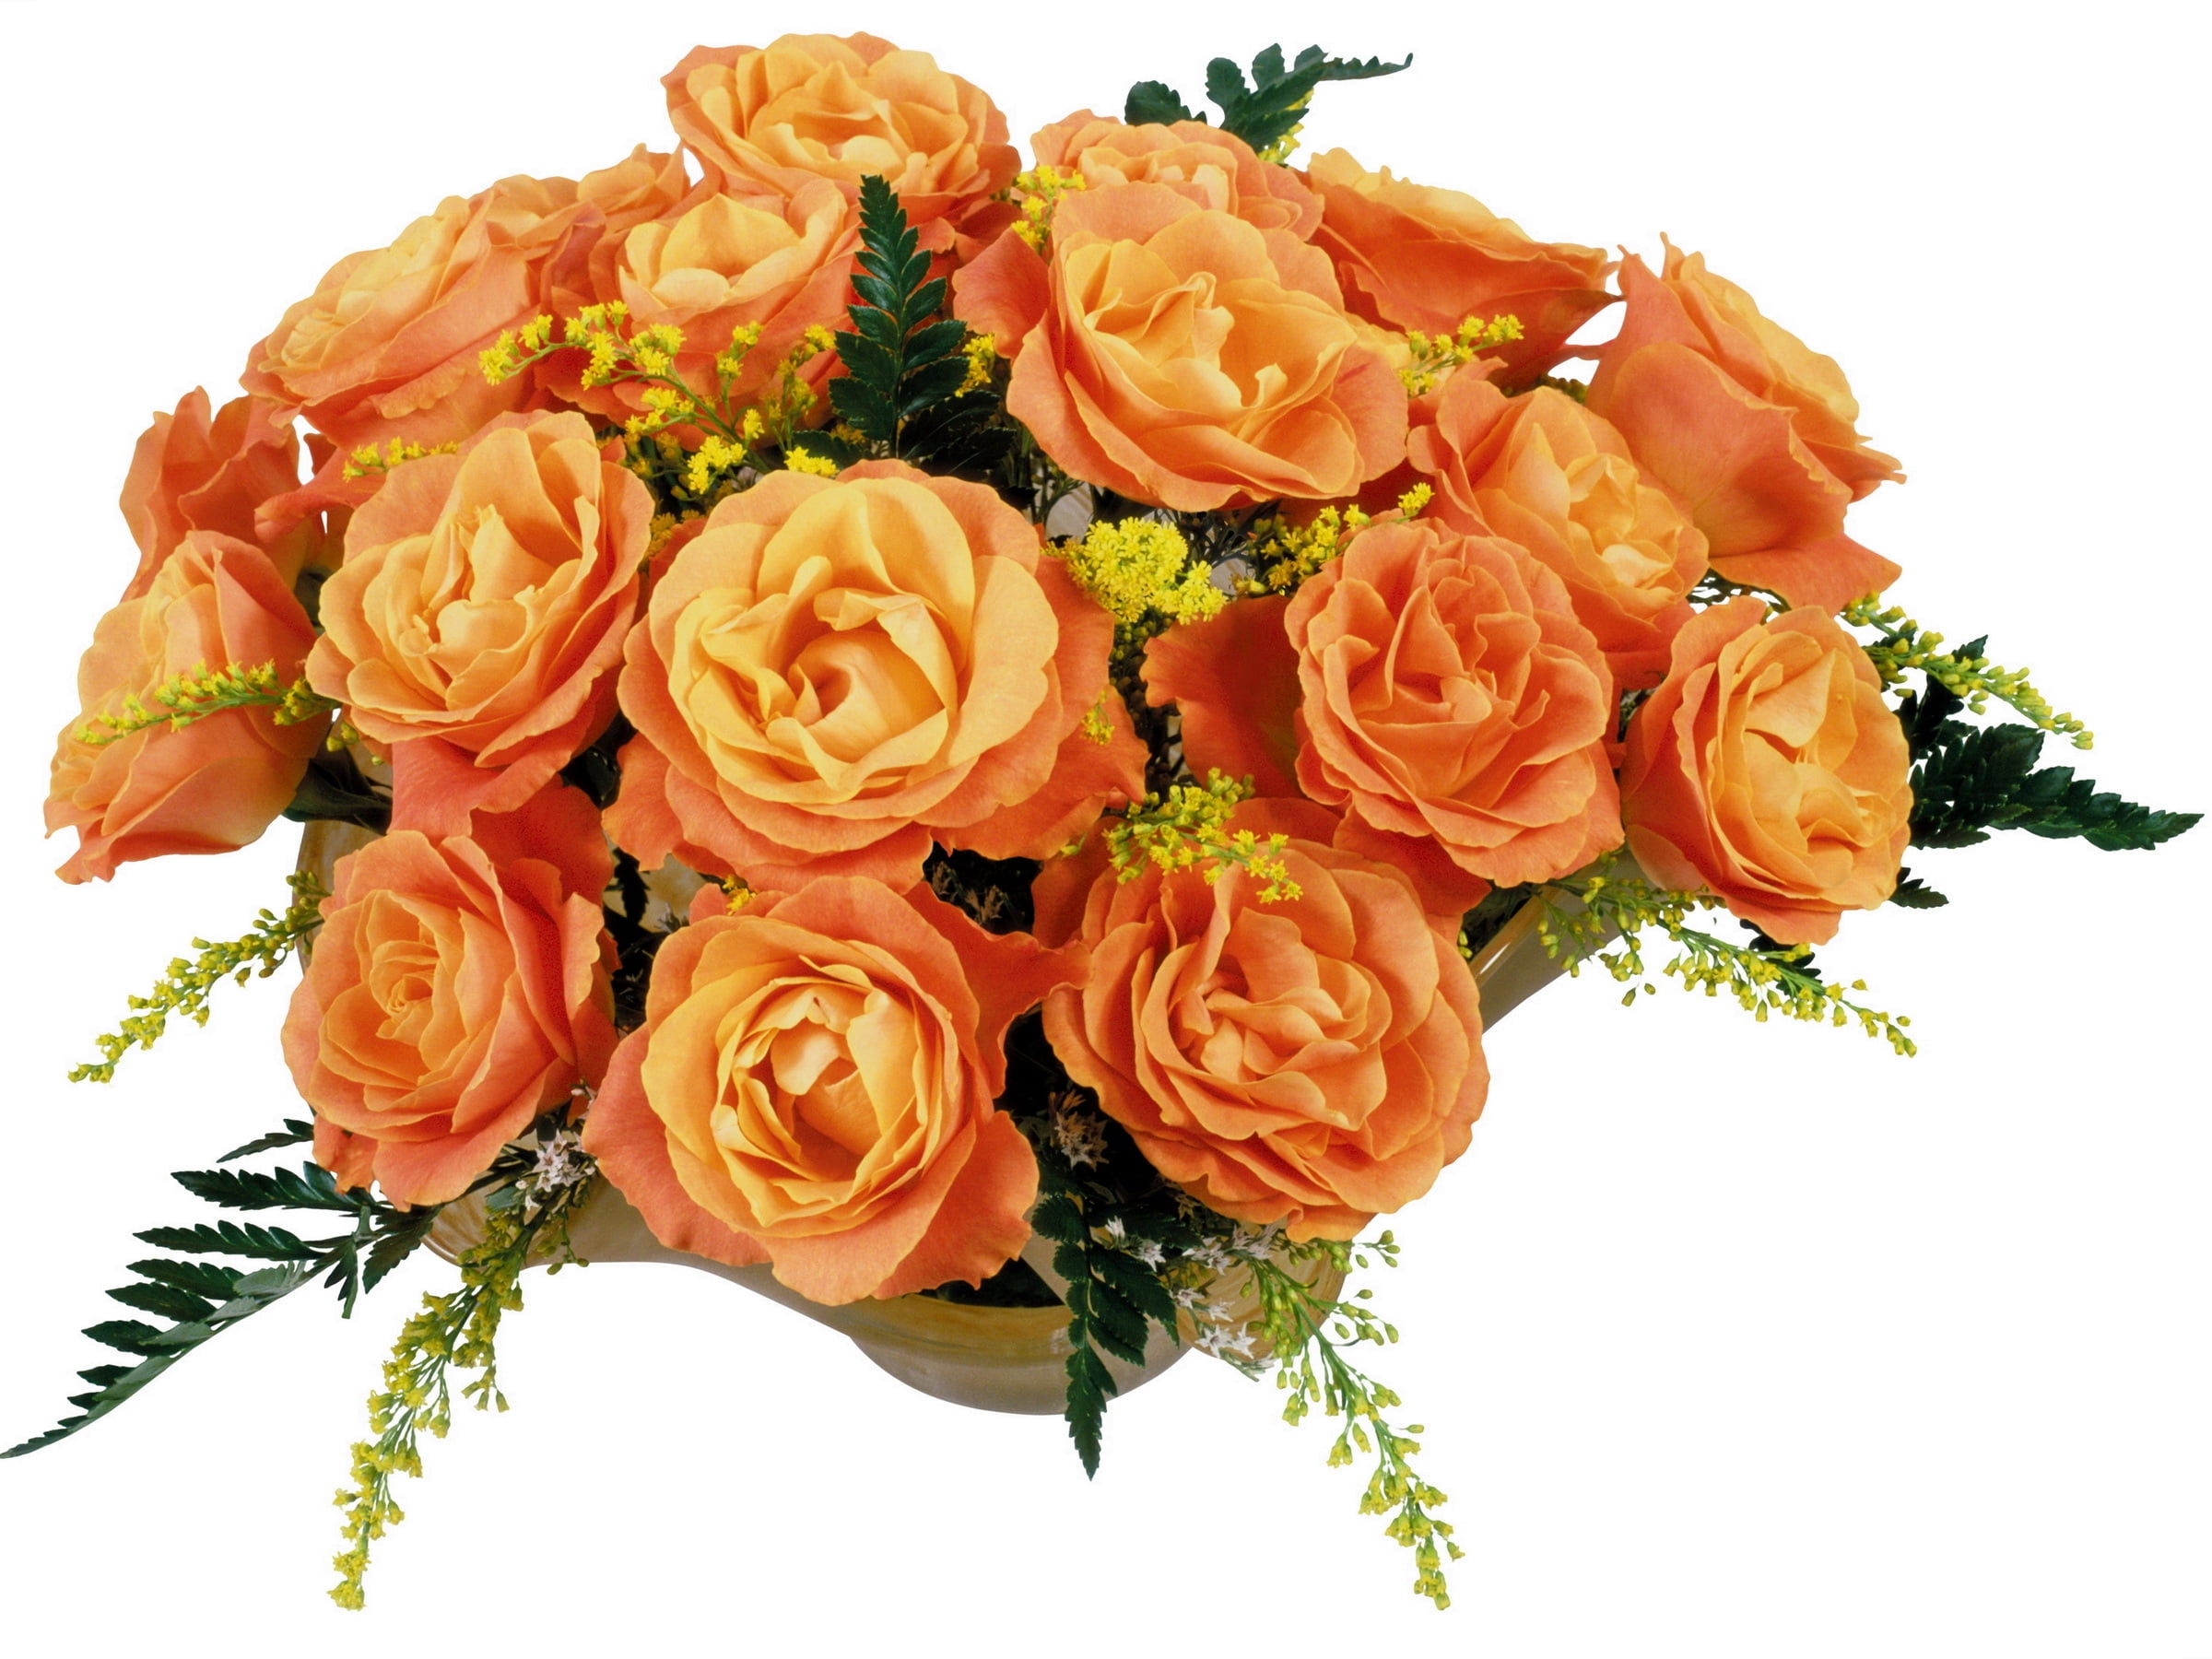 1280x720 resolution | orange Roses and yellow Goldenrod flowers bouquet ...